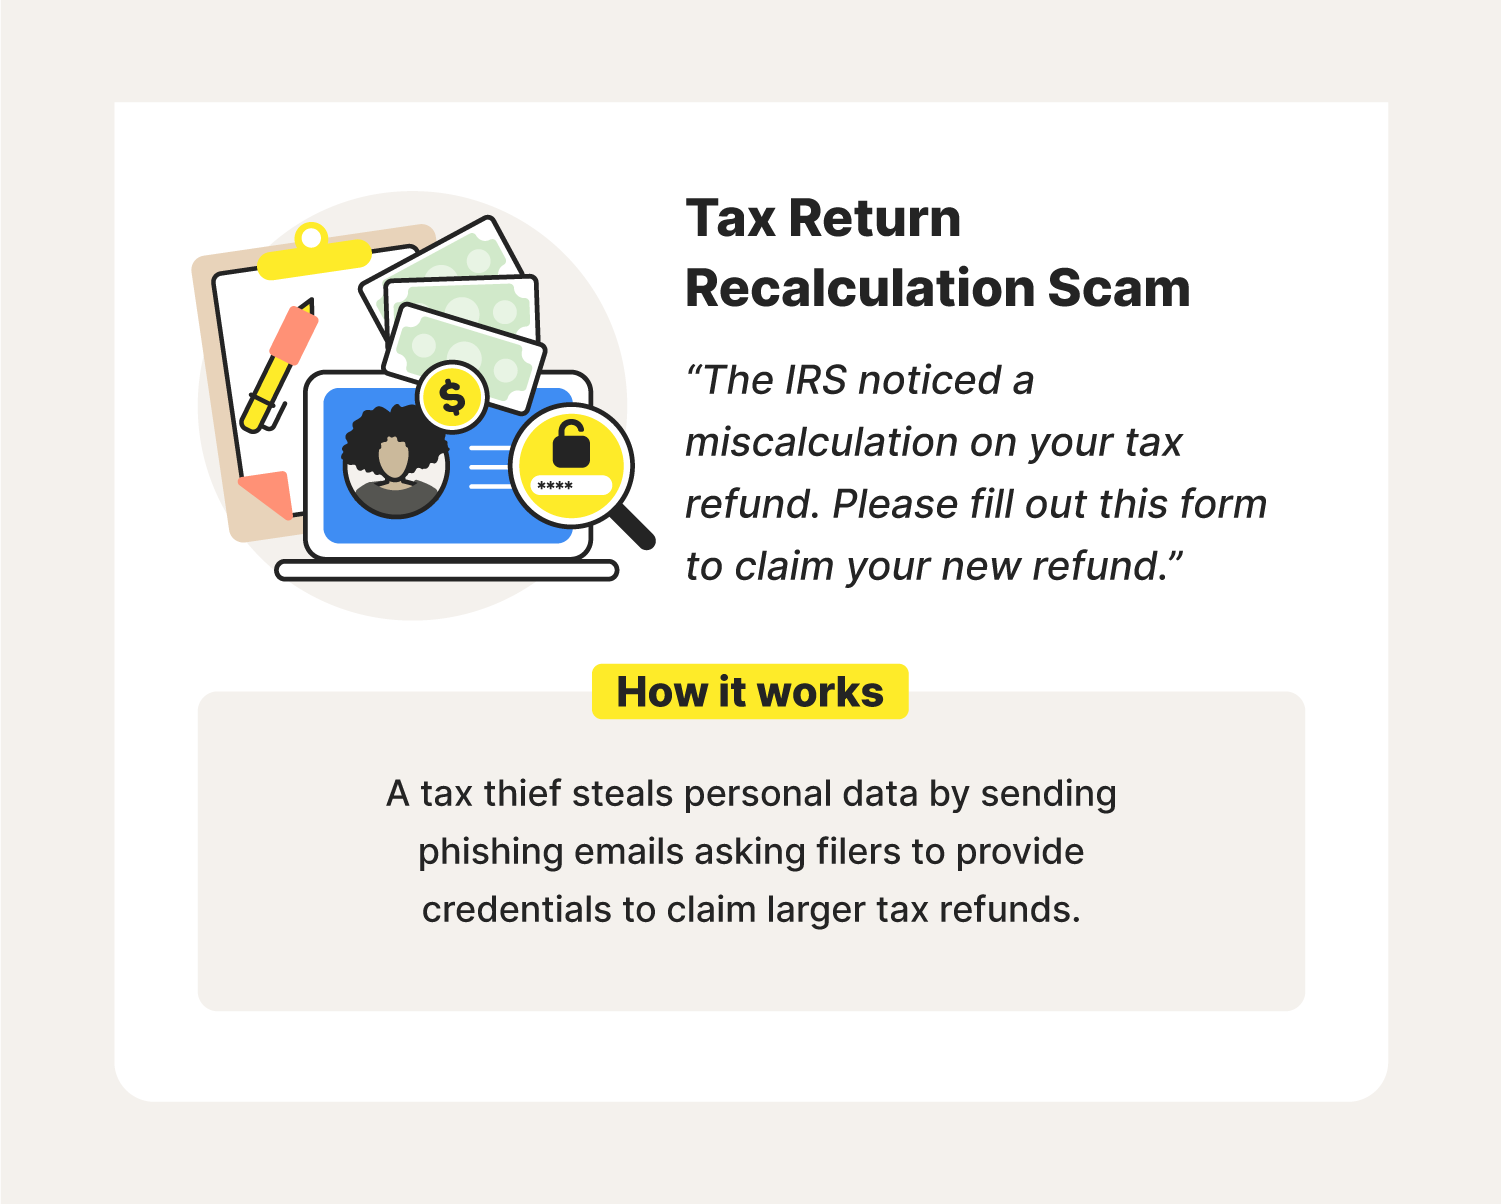 An illustration accompanies an explanation of how a tax return recalculation scam works to show the true dangers of IRS scams.